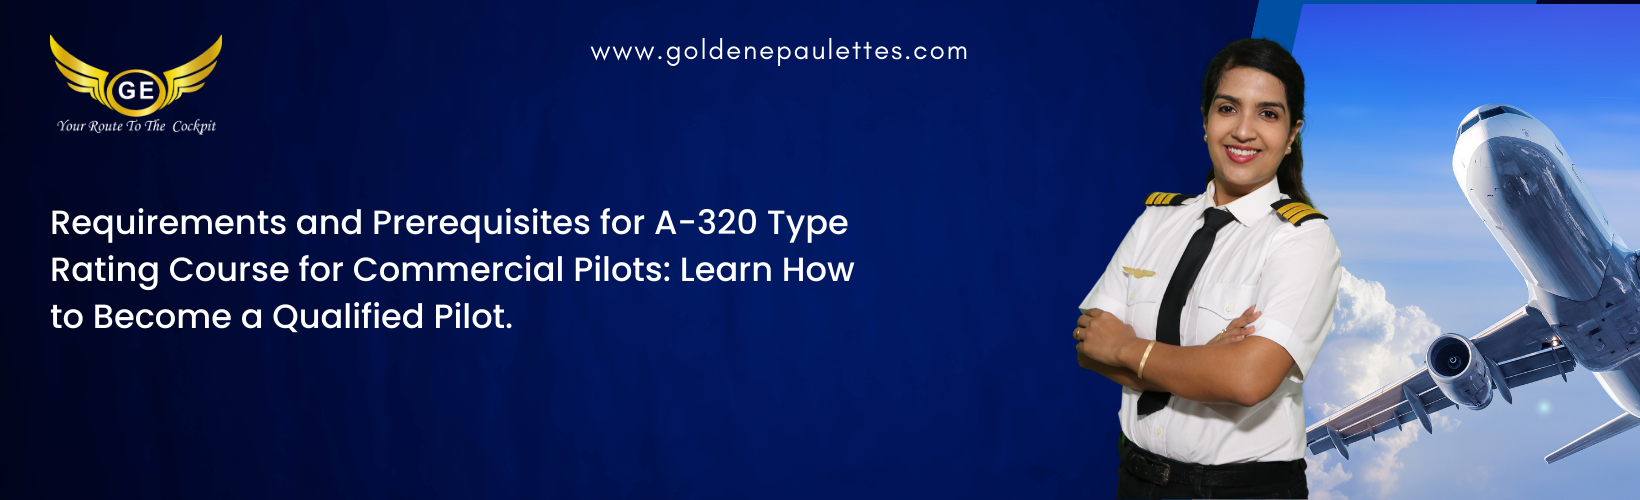 Pilots Career Options with A-320 Type Rating